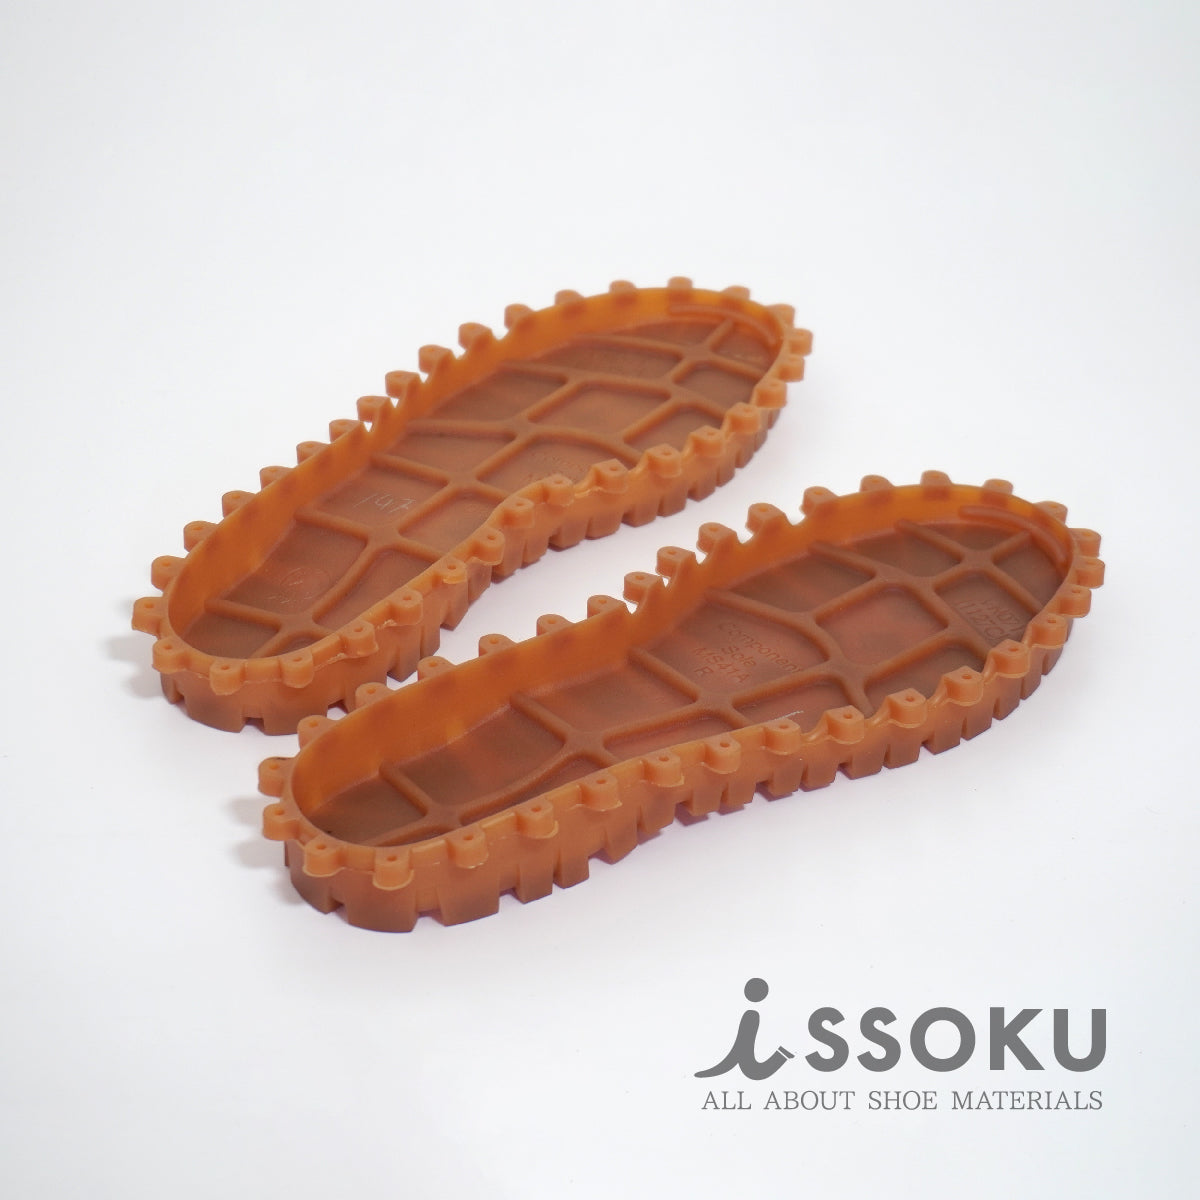 ☆[Sole] VIBRAM COMPONENT-Special upper by issoku